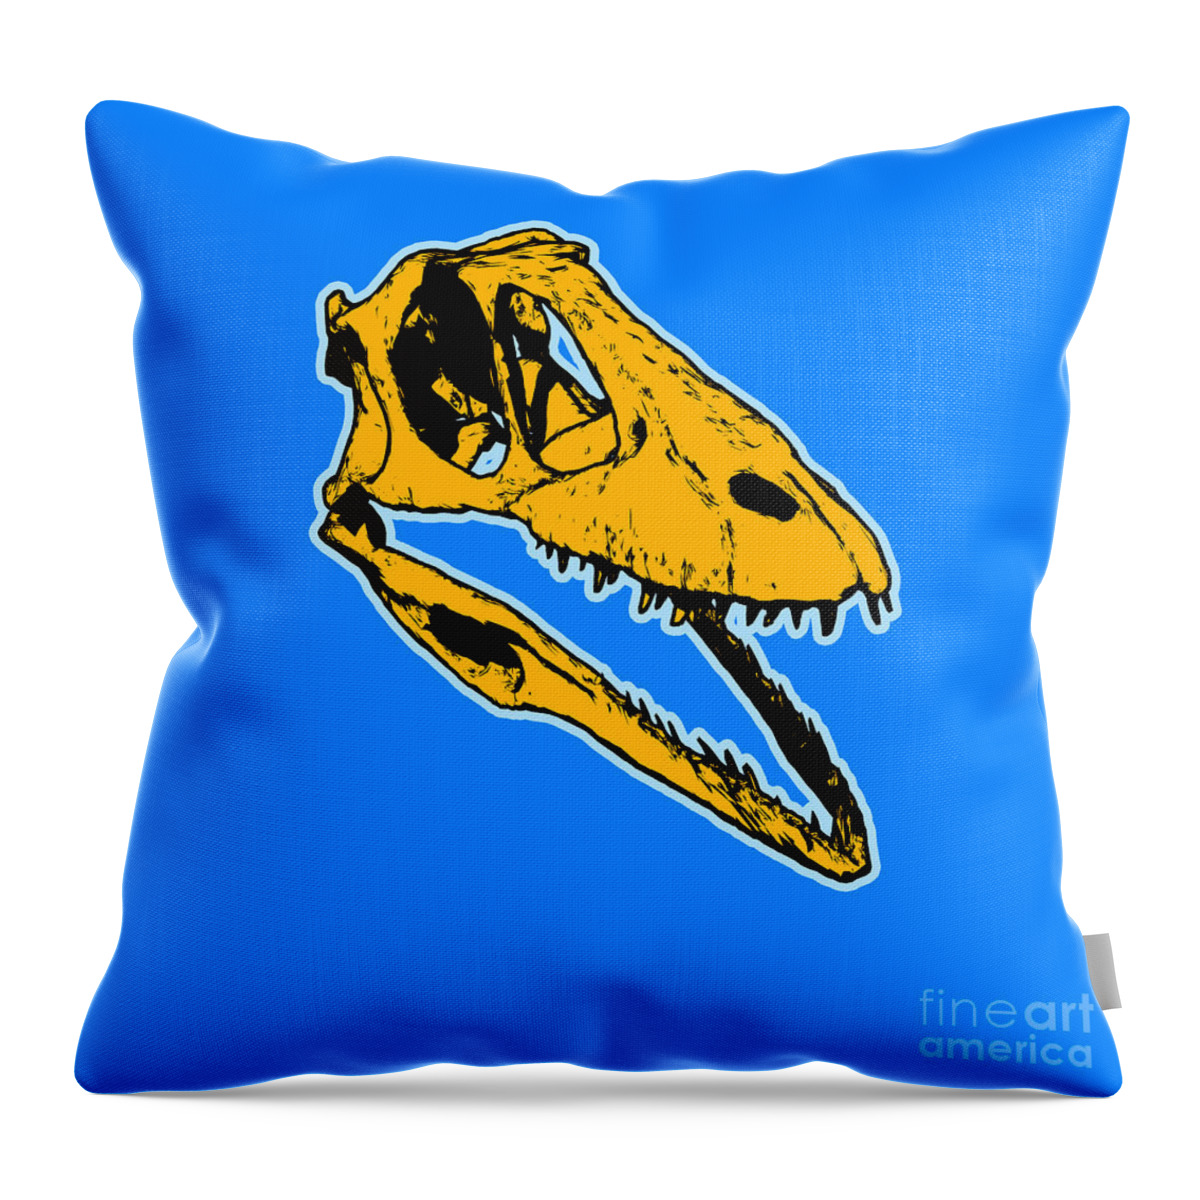 Dinosaur Throw Pillow featuring the painting T-Rex Graphic by Pixel Chimp